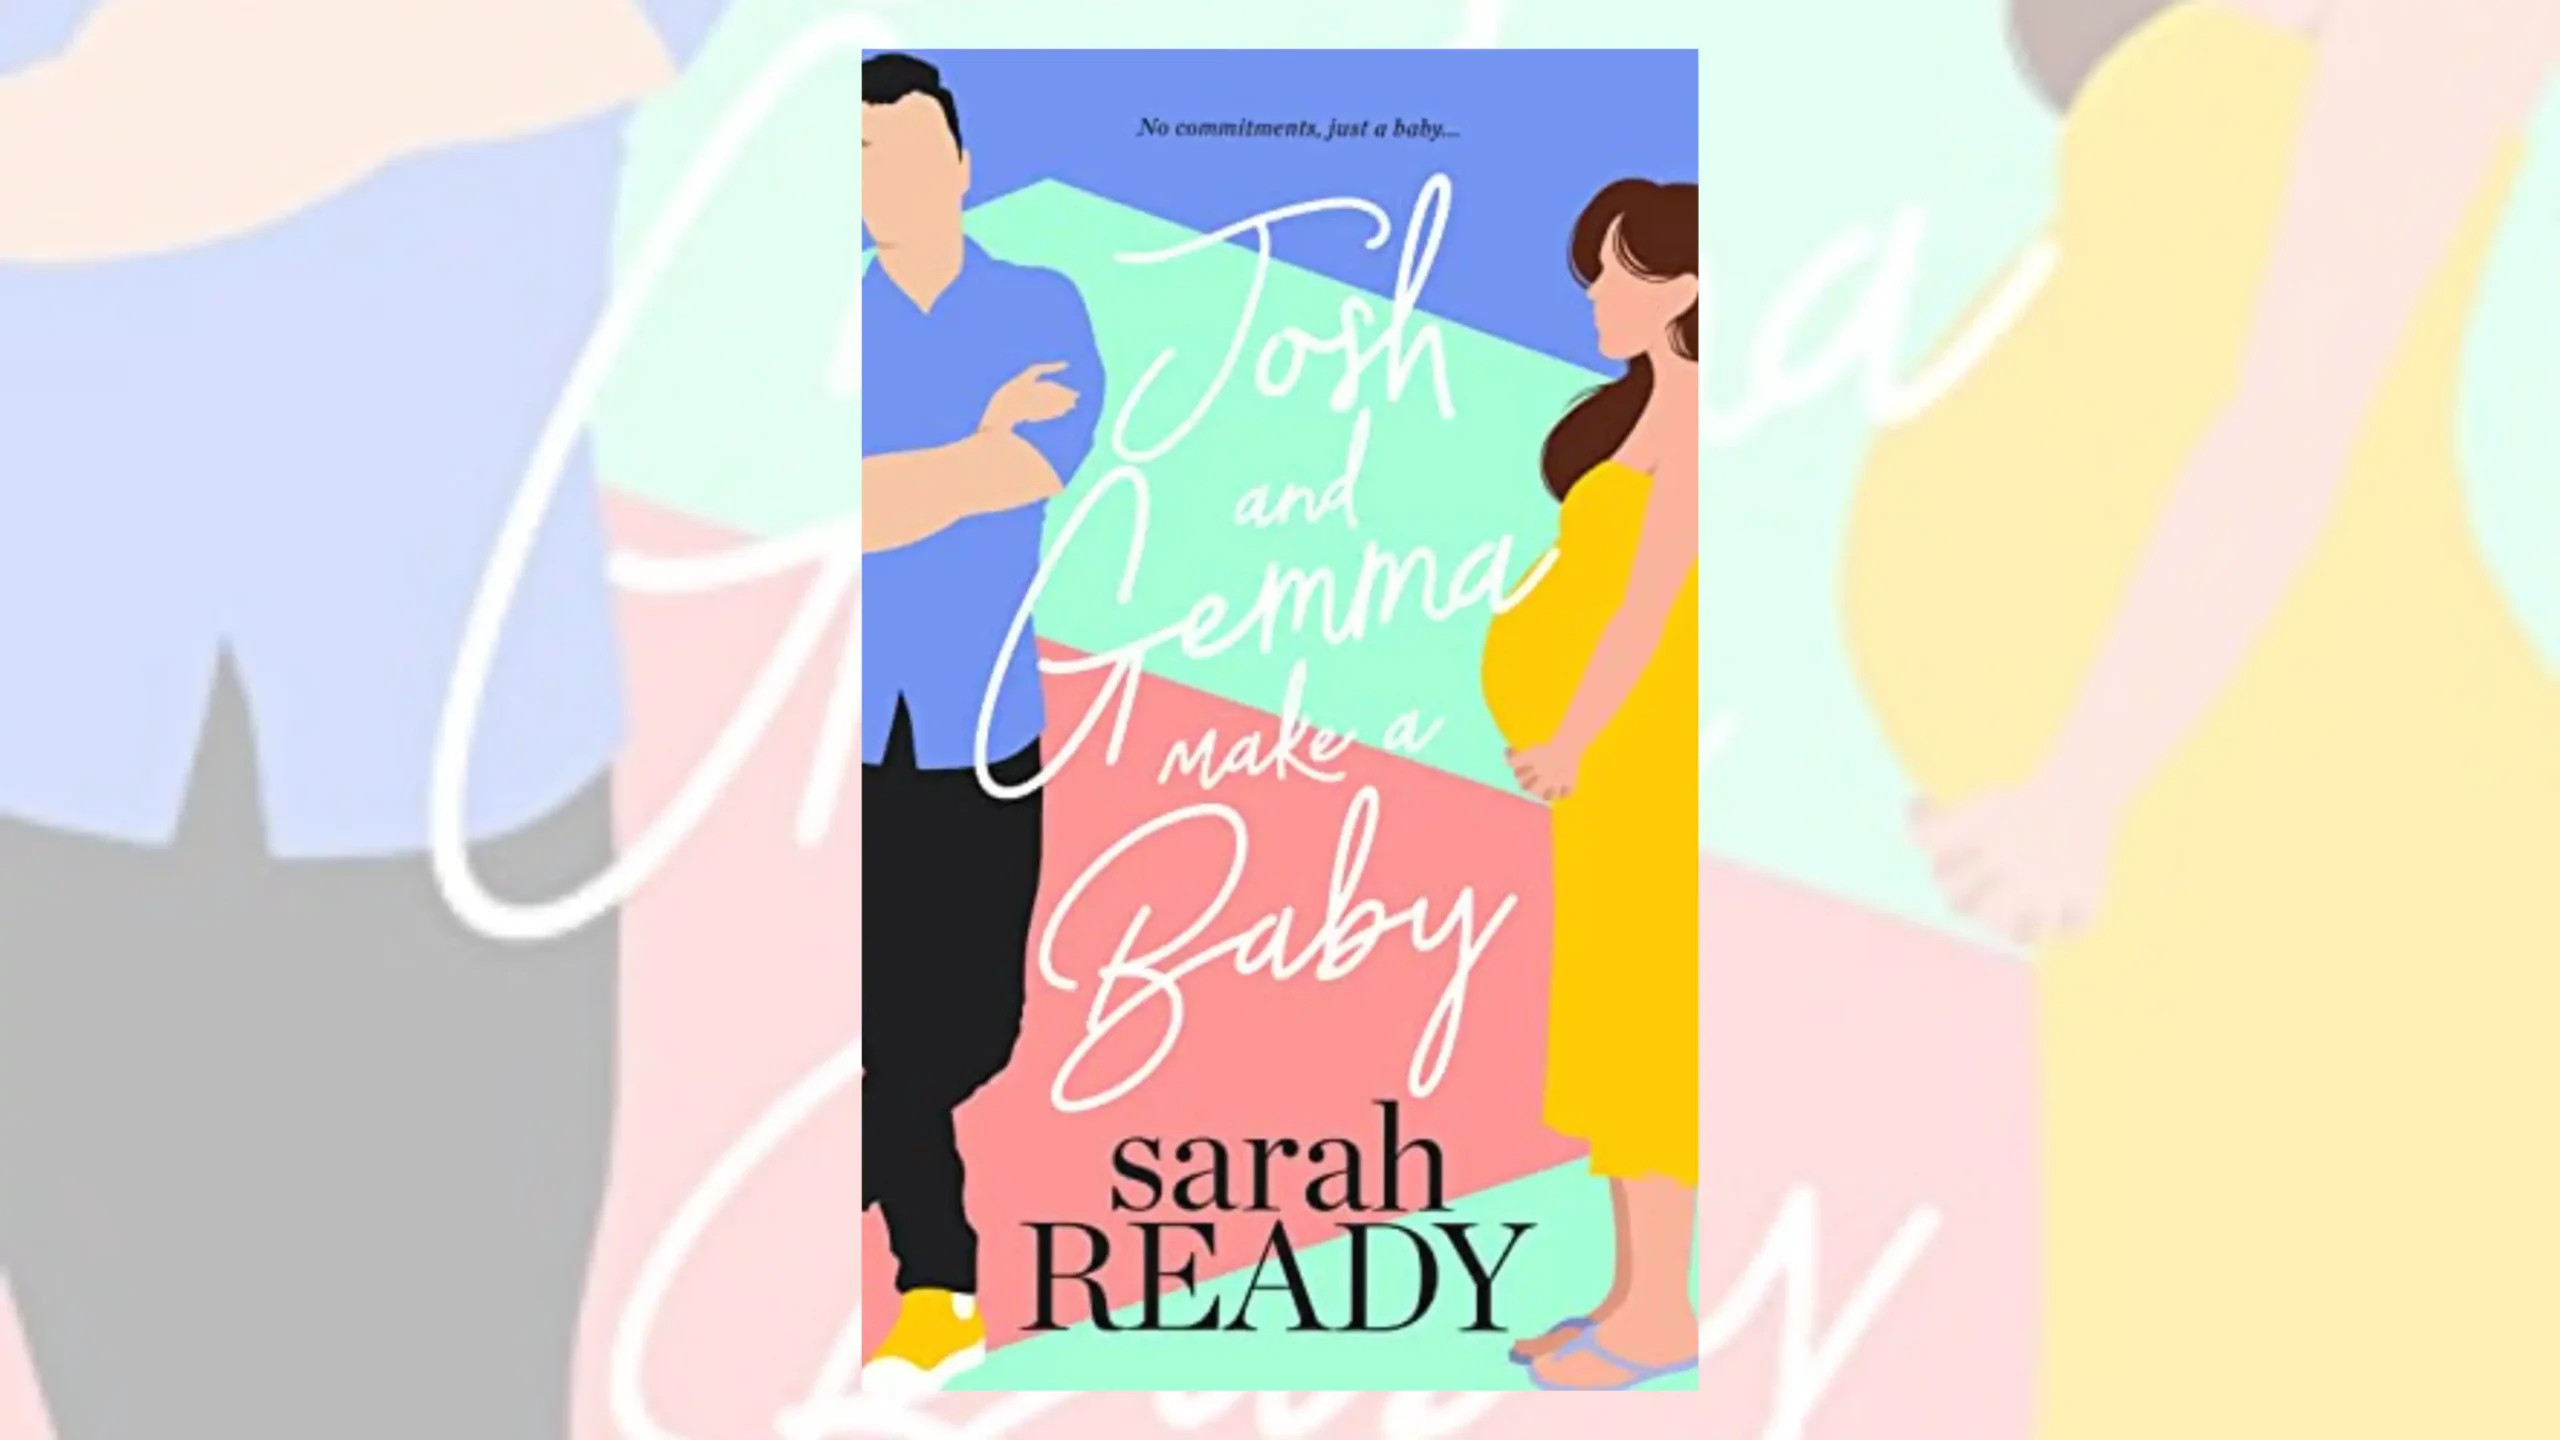 Josh abs Gemma make a baby book review scaled